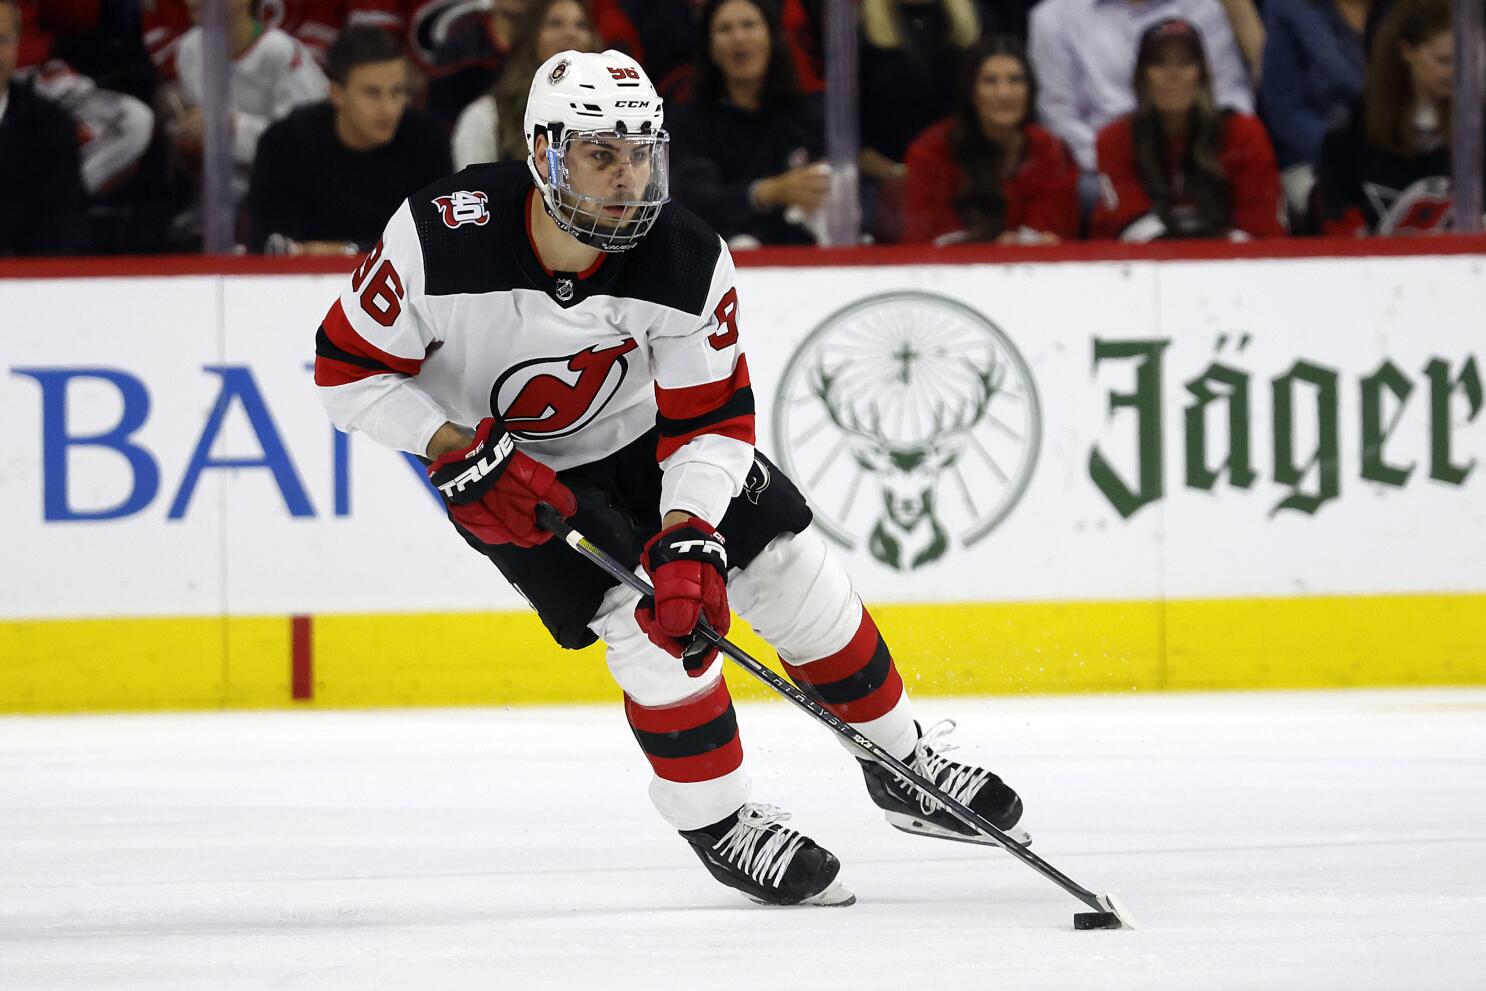 AGAINST THE FLYERS, A DEVILS' STAR IS BORN IN DAMON SEVERSON